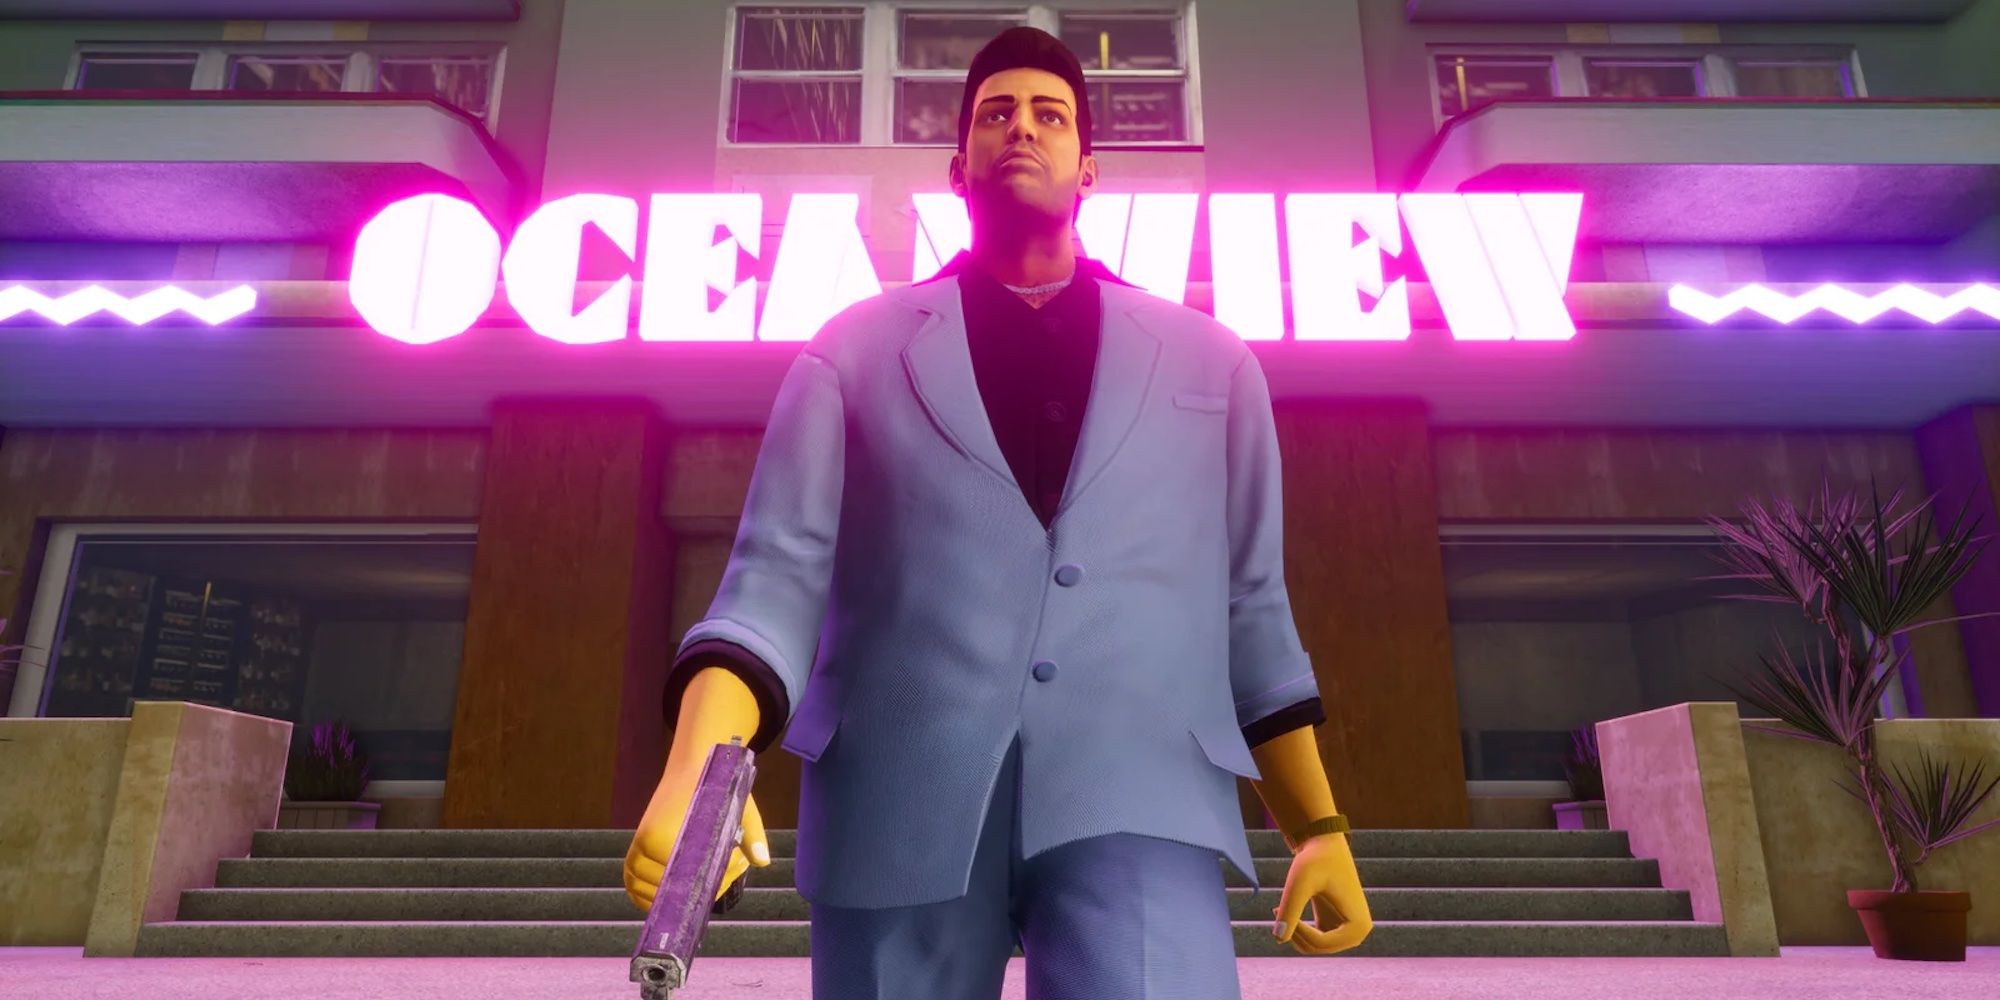 GTA Vice City is a classic game for players